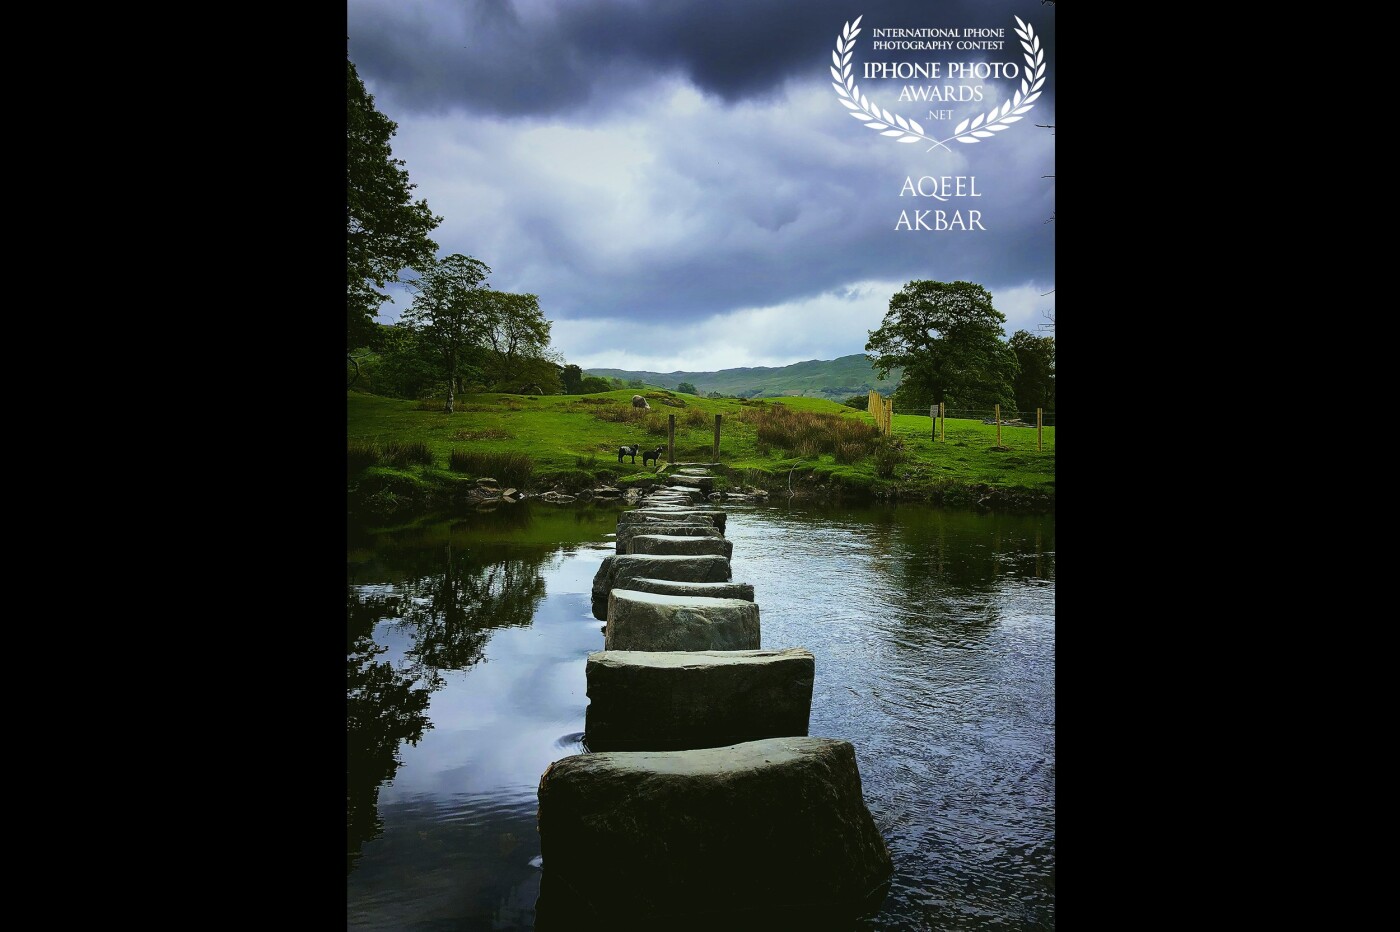 The Lake District, Cumbria, to me is an area of stunning beauty and coming here I find myself overcoming challenges that I would previously think I couldn’t do. These stepping stones are a reminder to me that in life it’s important to have smaller goals in place while working on the big long term goal - so those small little victories you get will give you the drive to continue onto the accomplishing the bigger goals.